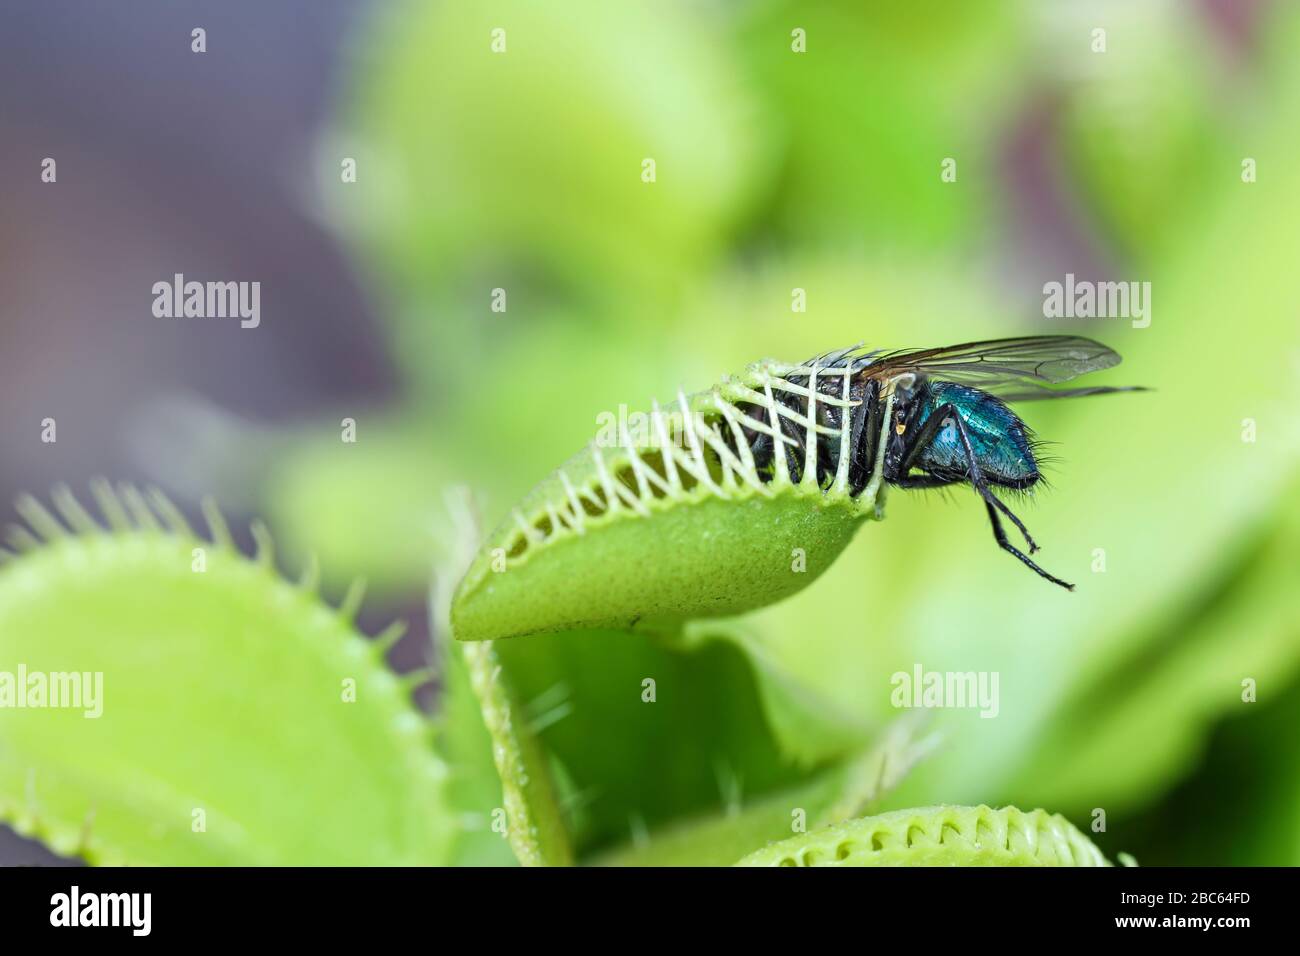 Venus Flytrap Dionaea muscipula with Trapped Fly (one of two images, showing trap sequence). Stock Photo